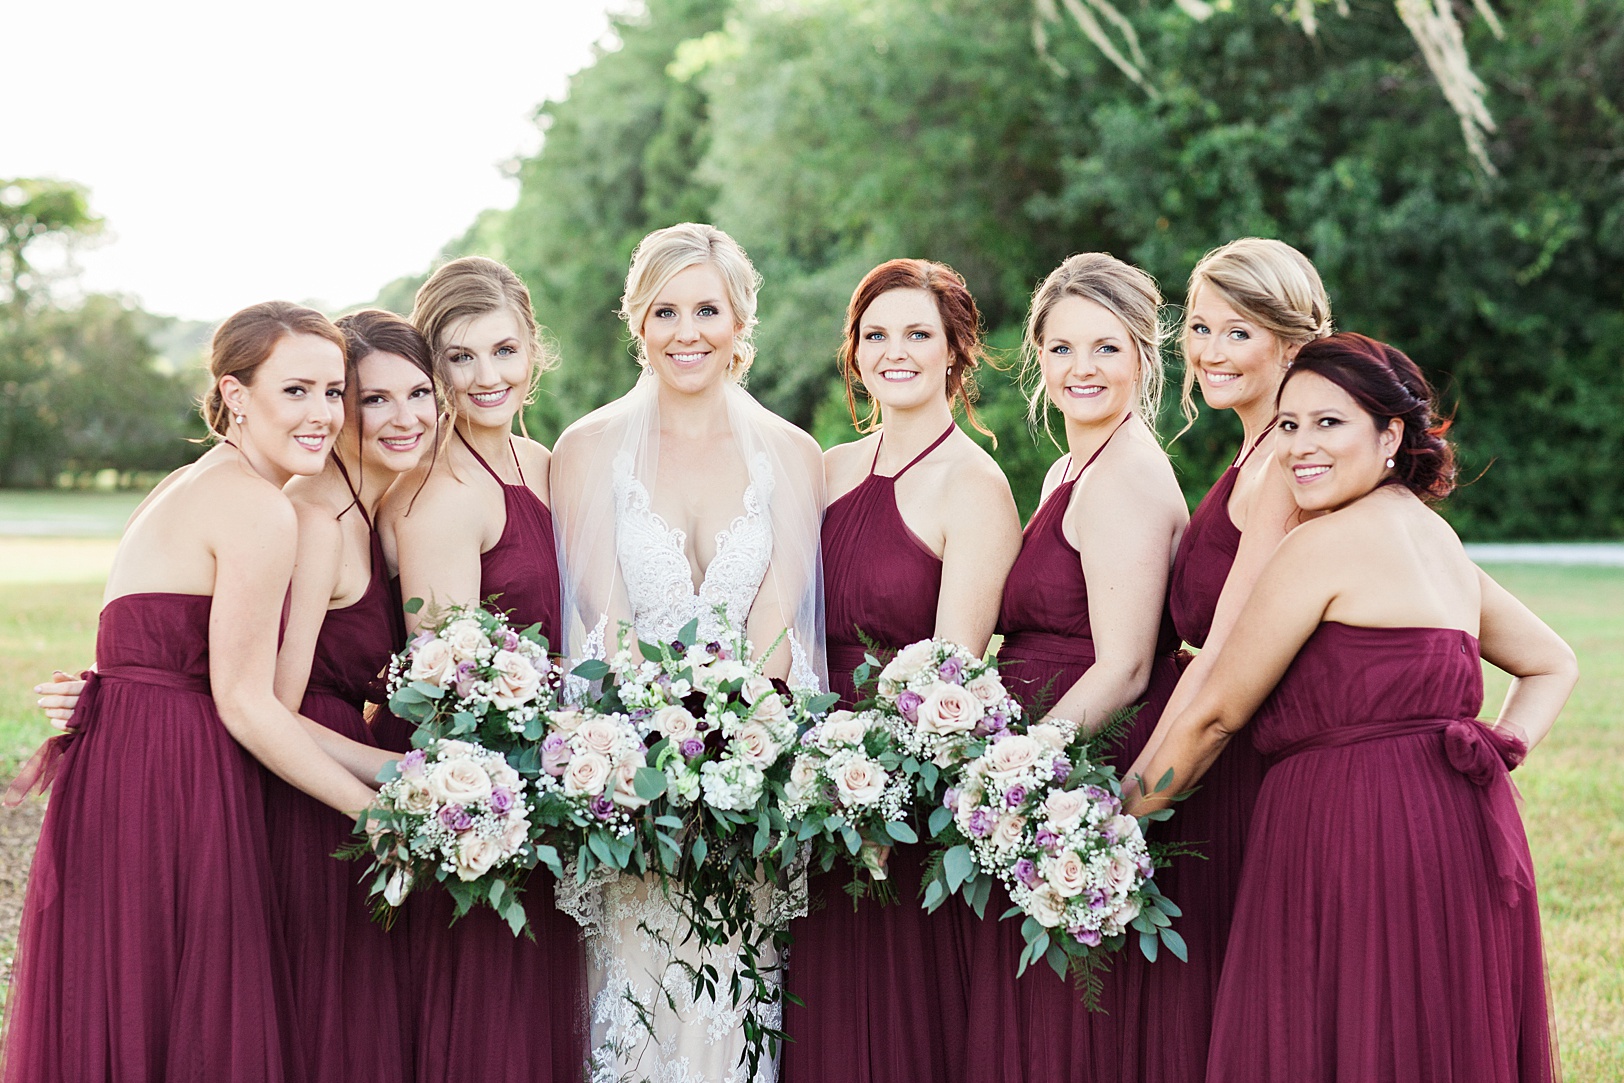 Bride and Bridesmaids | Burgundy Dresses | Bride and Bridesmaids | Kaitlin Scott Photography